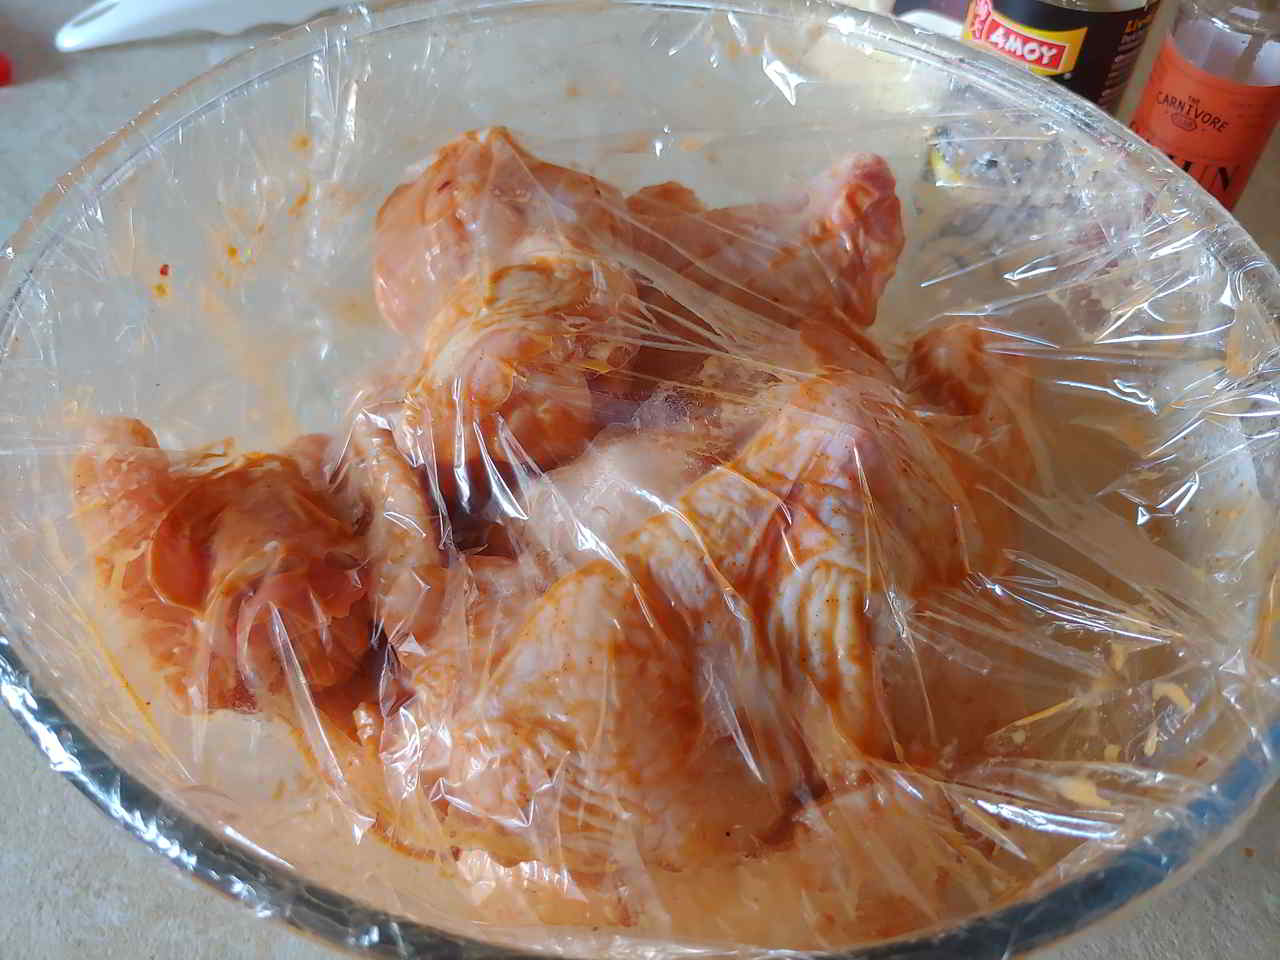 Chicken wings marinated in wet mix and covered in cling film